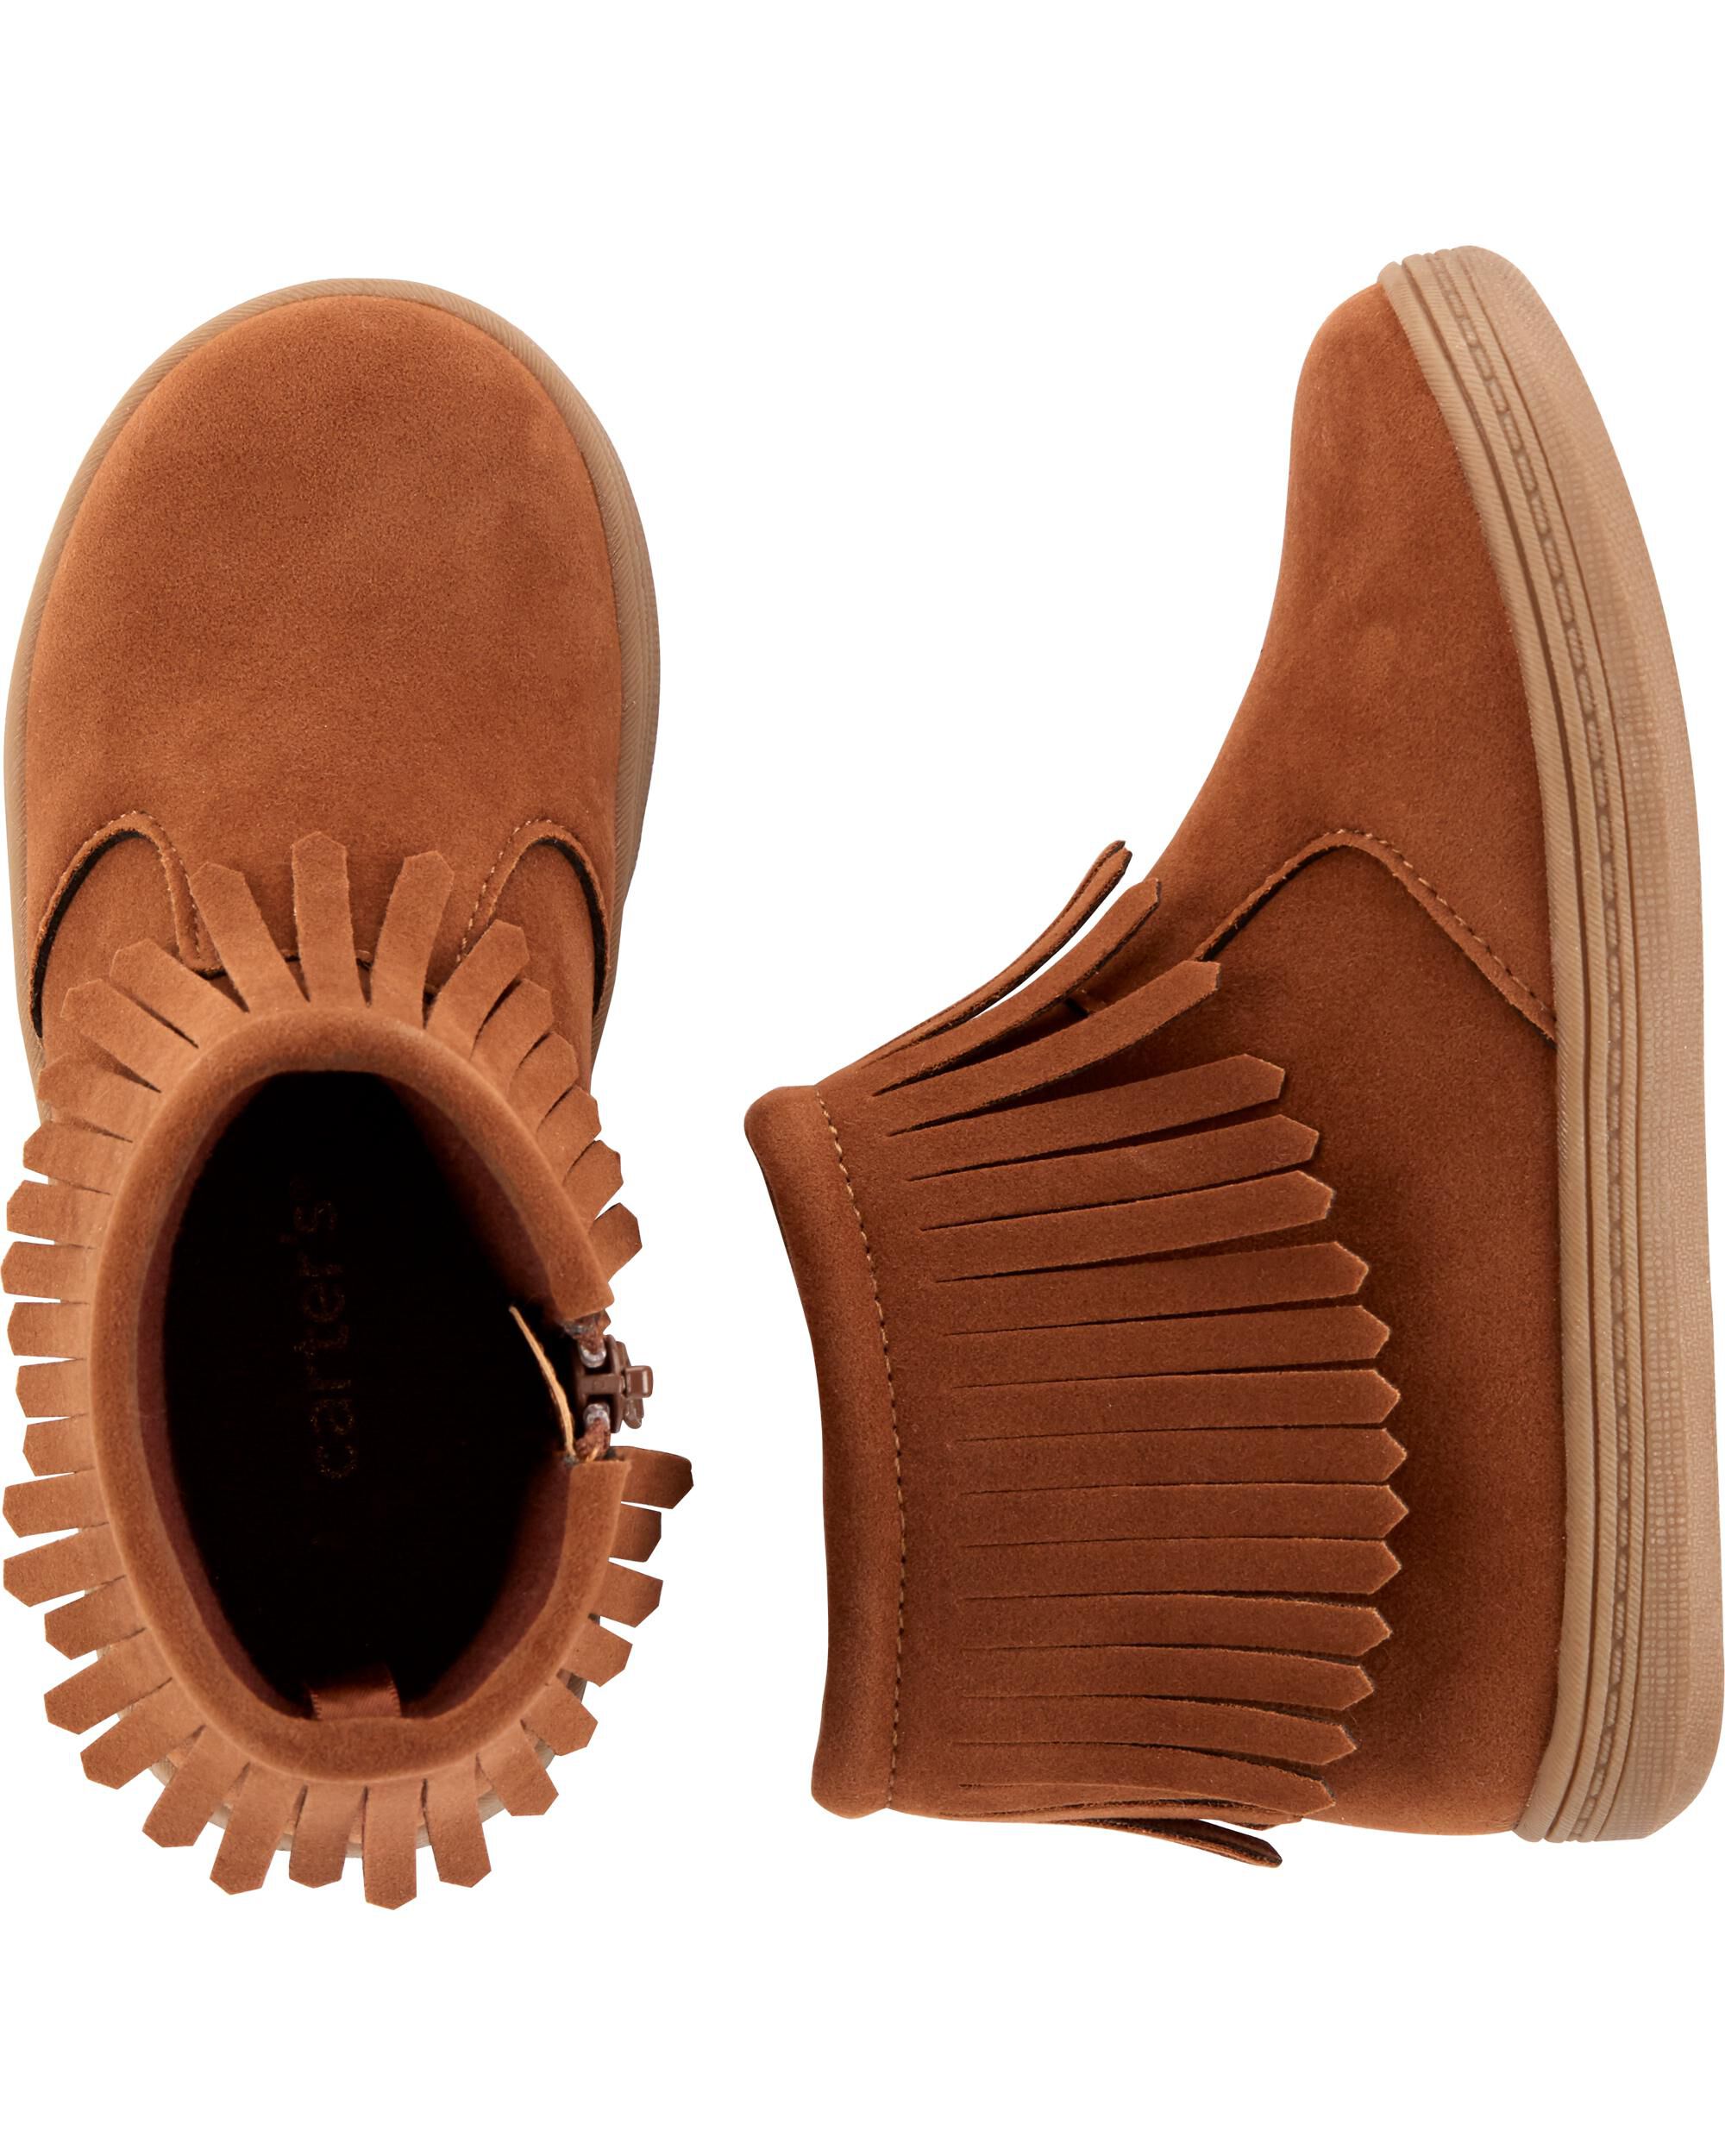 Carter's Moccasin Boots | carters.com